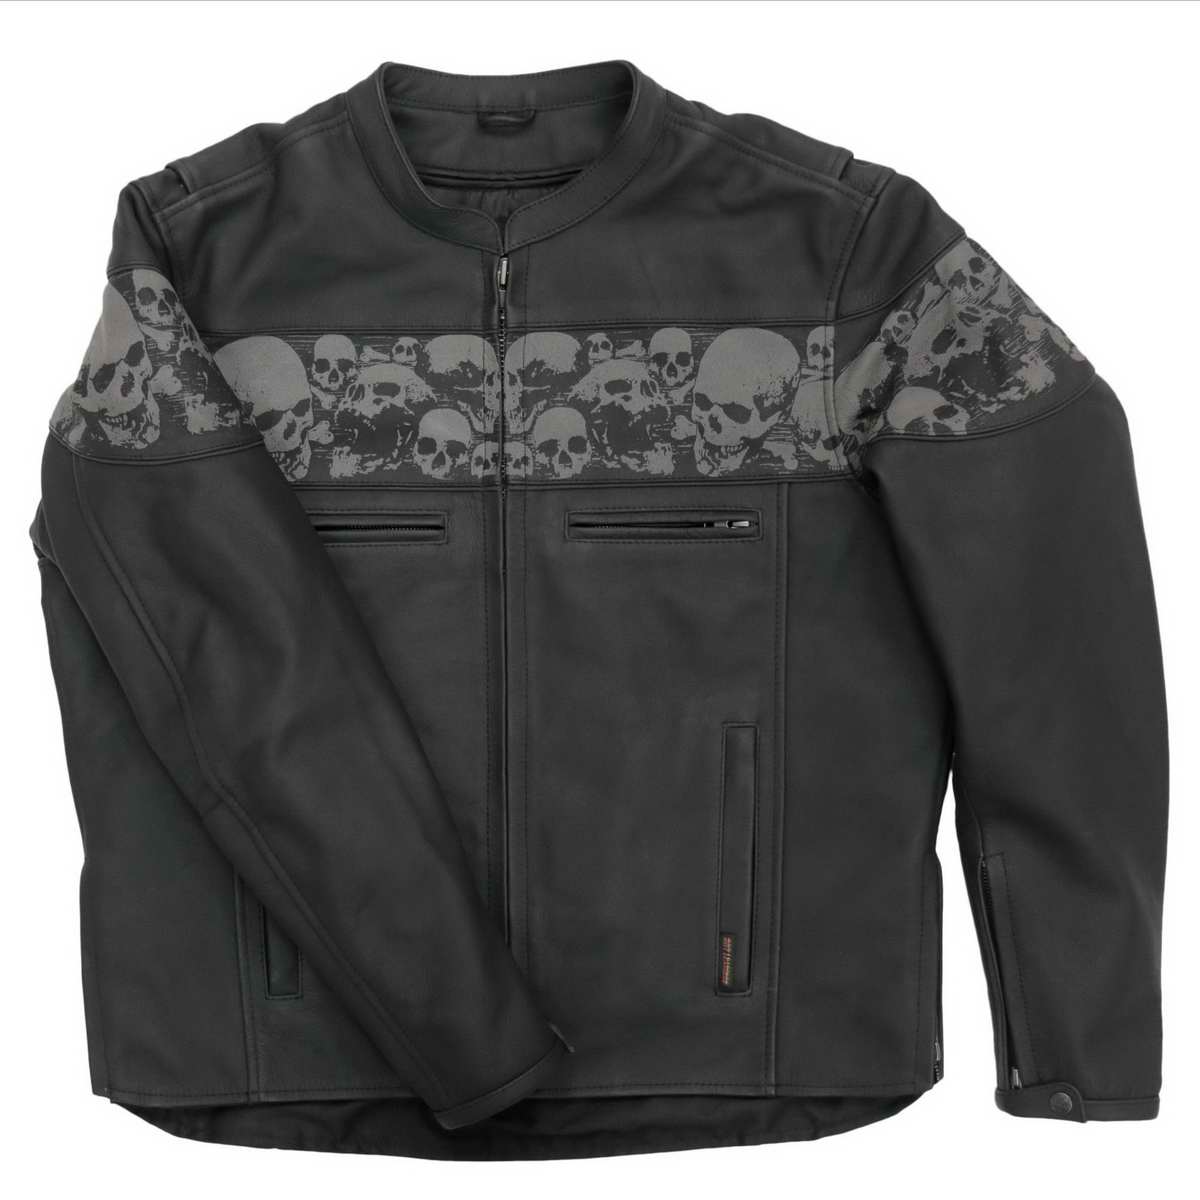 Hot Leathers JKM2002 Men’s Black ‘Reflective Skull' Printed Leather Jacket with Concealed Carry Pockets